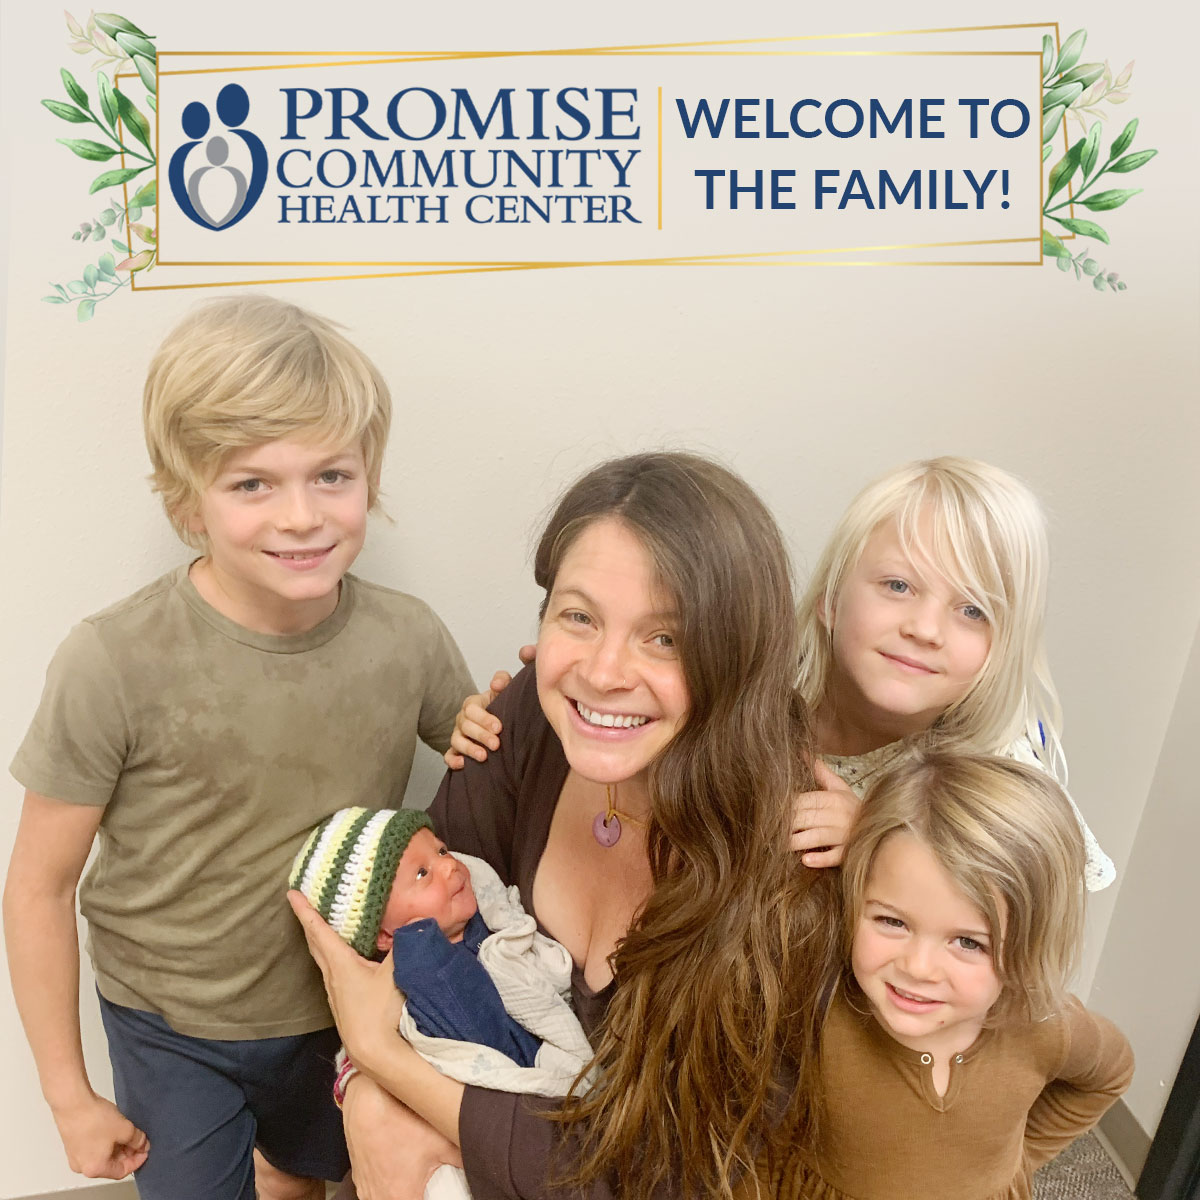 Home birth in Sioux City, Iowa | Promise Community Health Center in Sioux Center, Iowa | Midwives in northwest Iowa, Midwives in southeast South Dakota, Midwives in southwest Minnesota | Midwives in Sioux Falls South Dakota, Midwives in Beresford South Dakota, Midwives in Sioux City IA, Midwives in LeMars IA, Midwives in Worthington MN, Midwives in Iowa, Midwives in South Dakota, Midwives in Minnesota